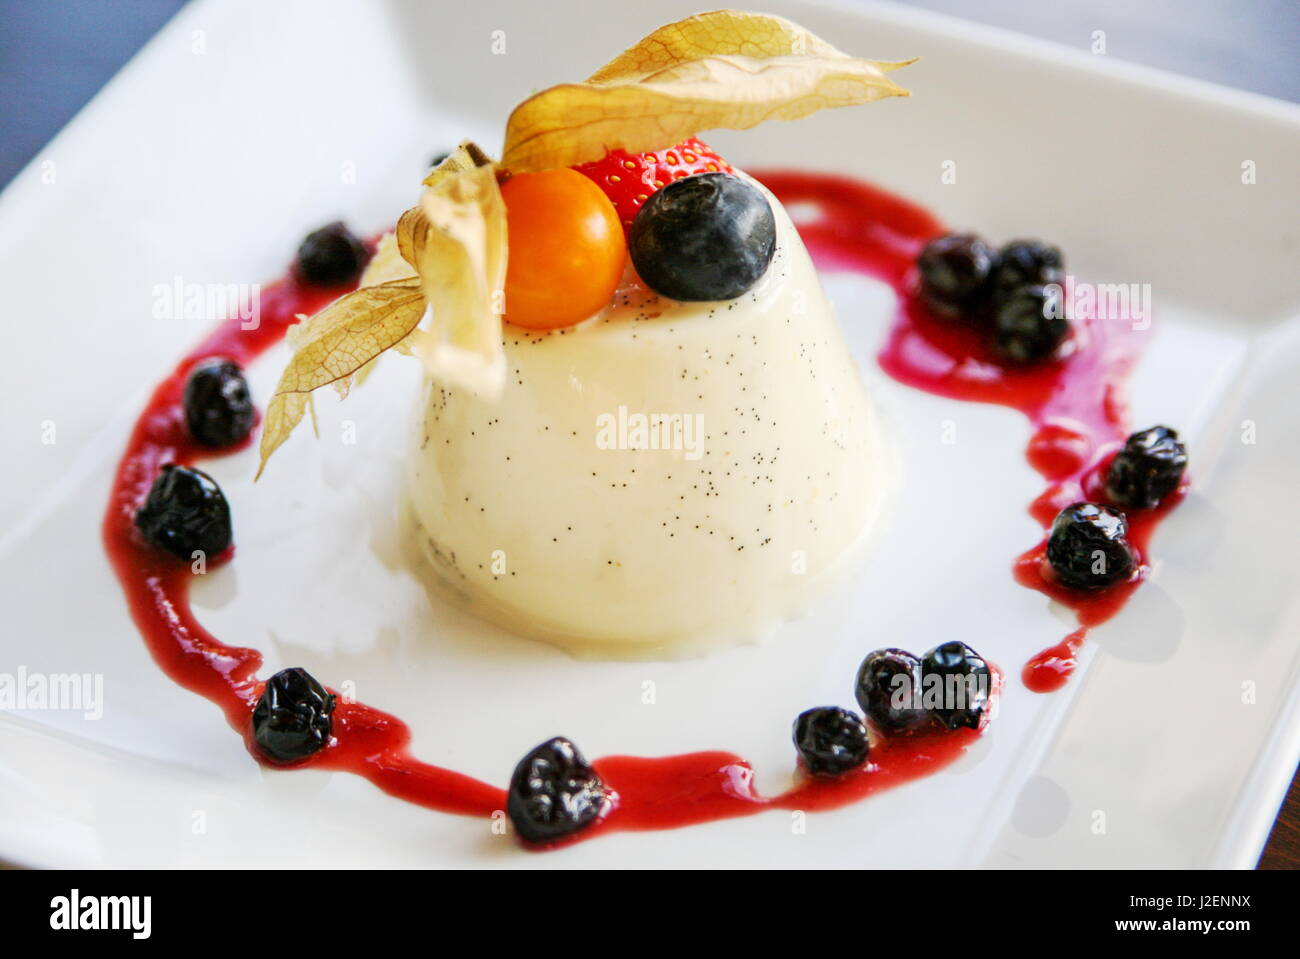 Panna cotta with blackcurrant coulis on a white plate Stock Photo